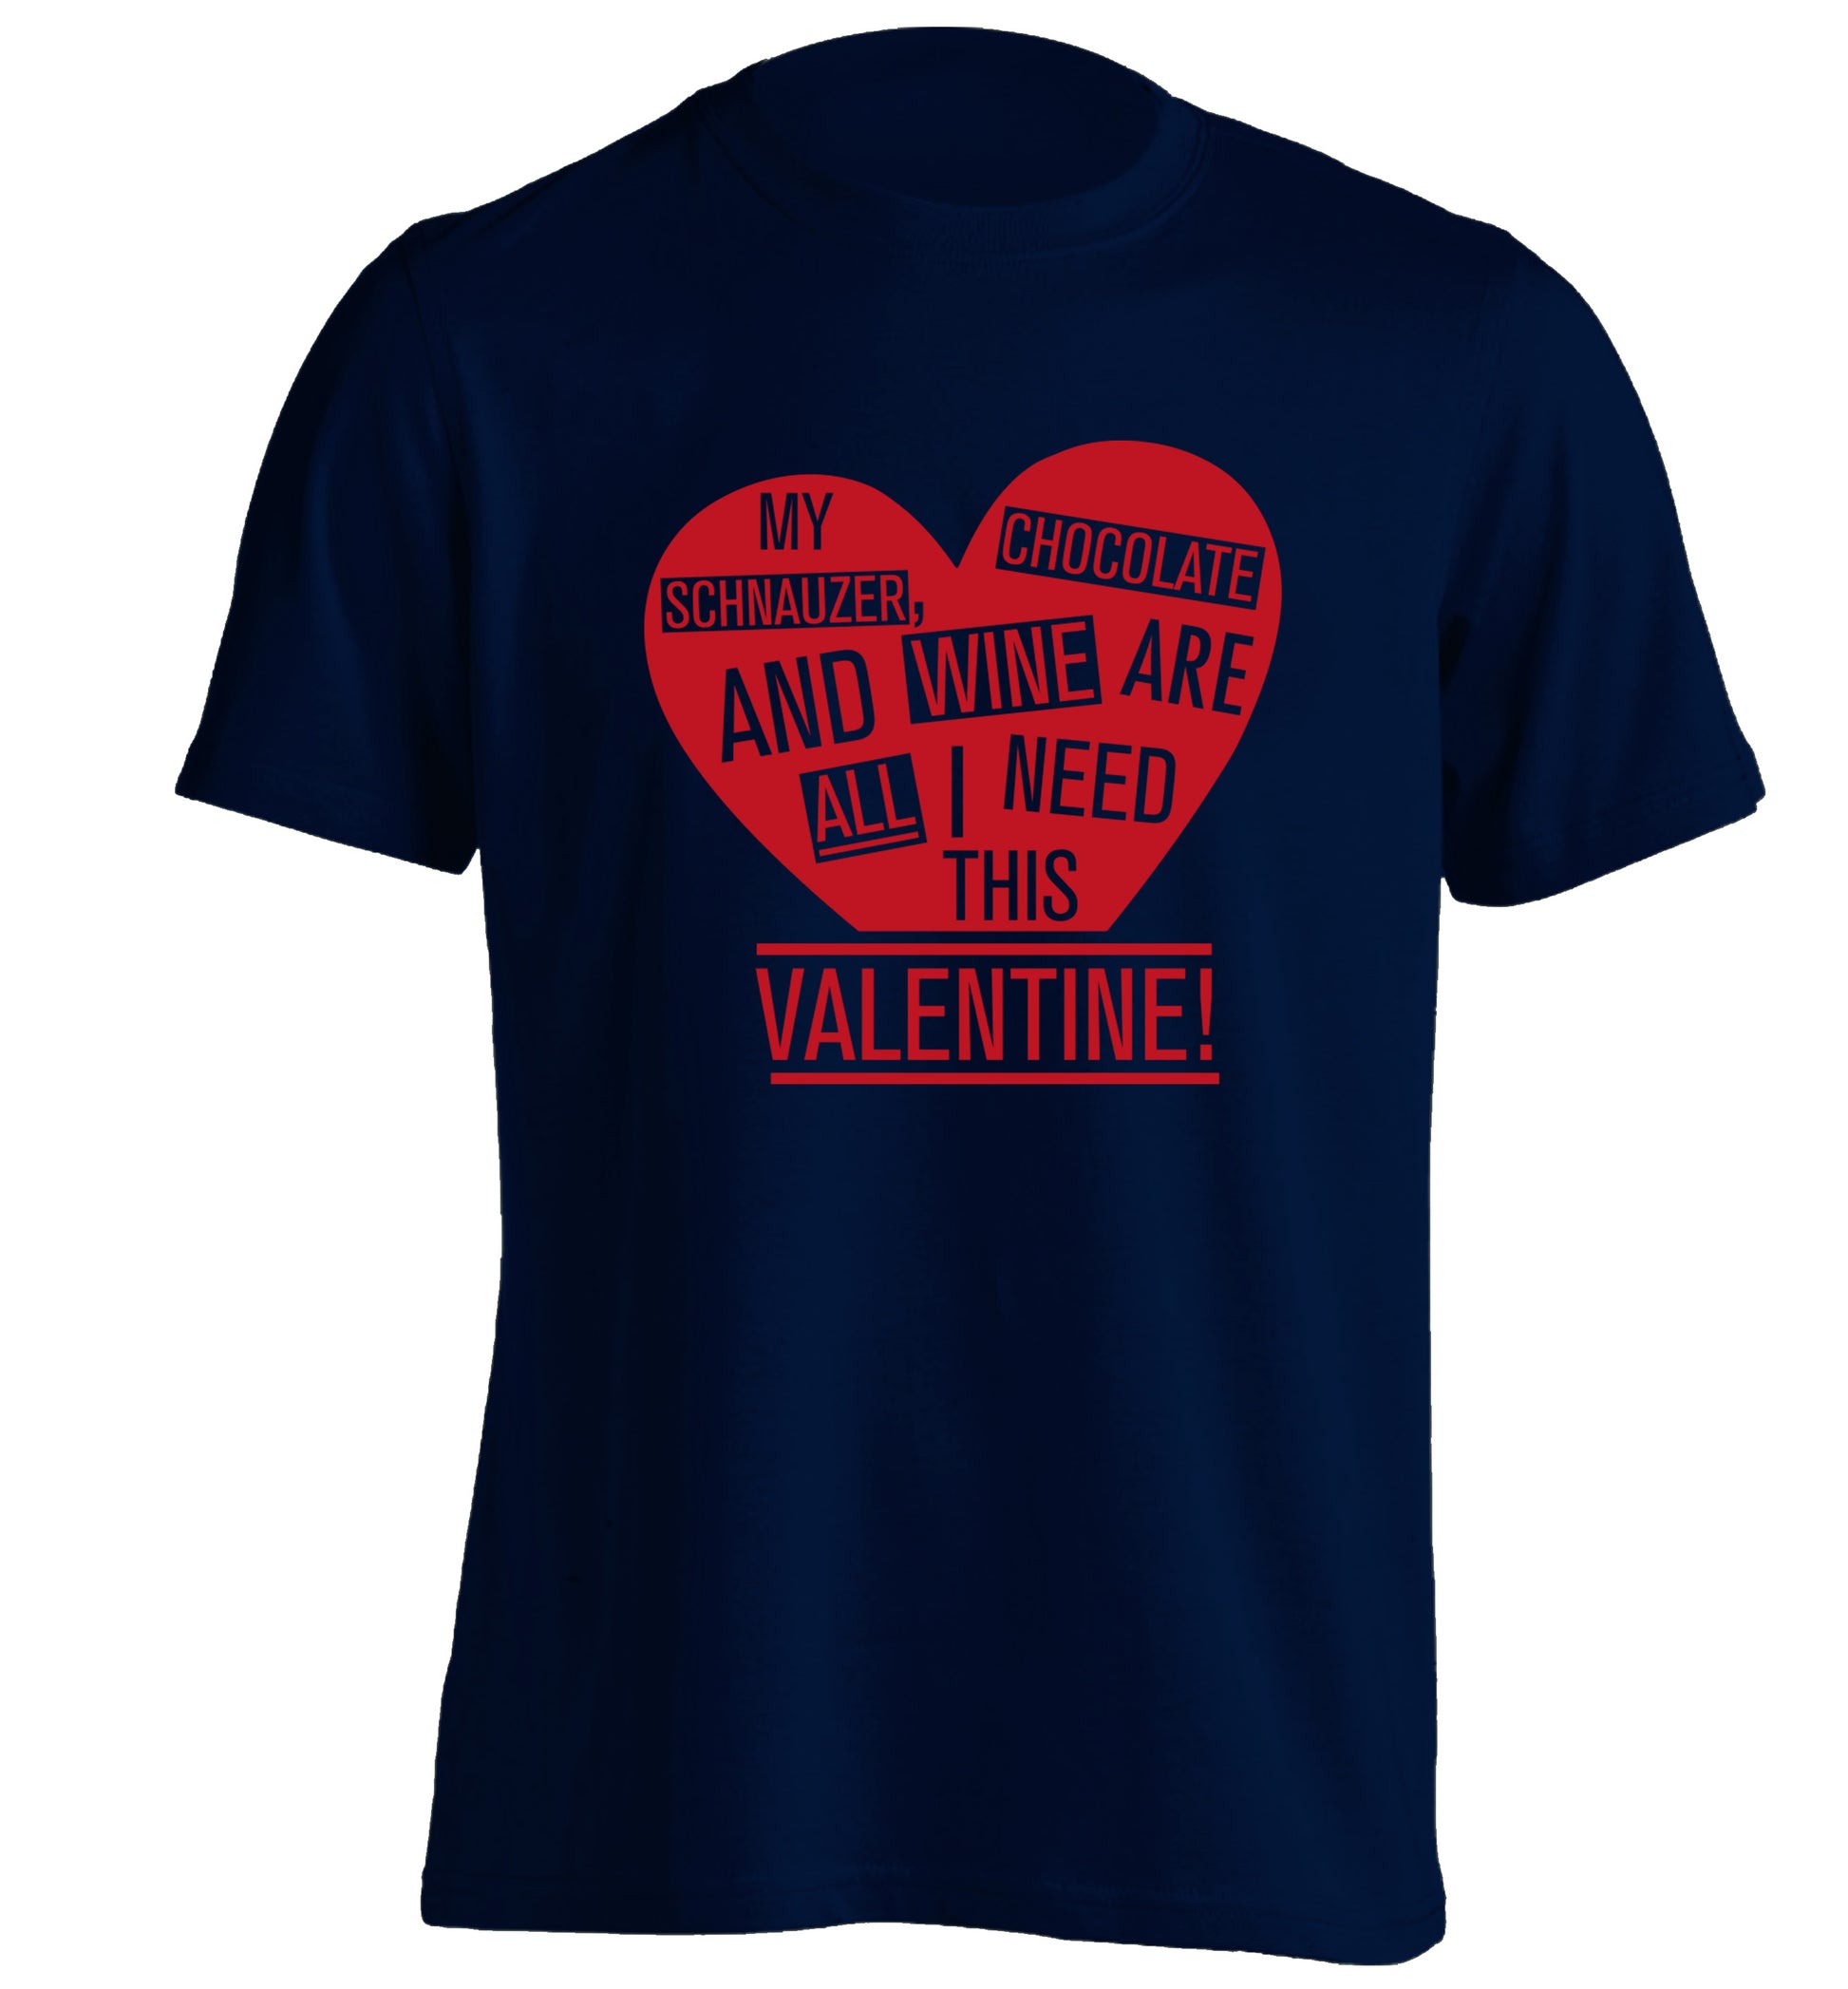 My schnauzer, chocolate and wine are all I need this valentine! adults unisex navy Tshirt 2XL